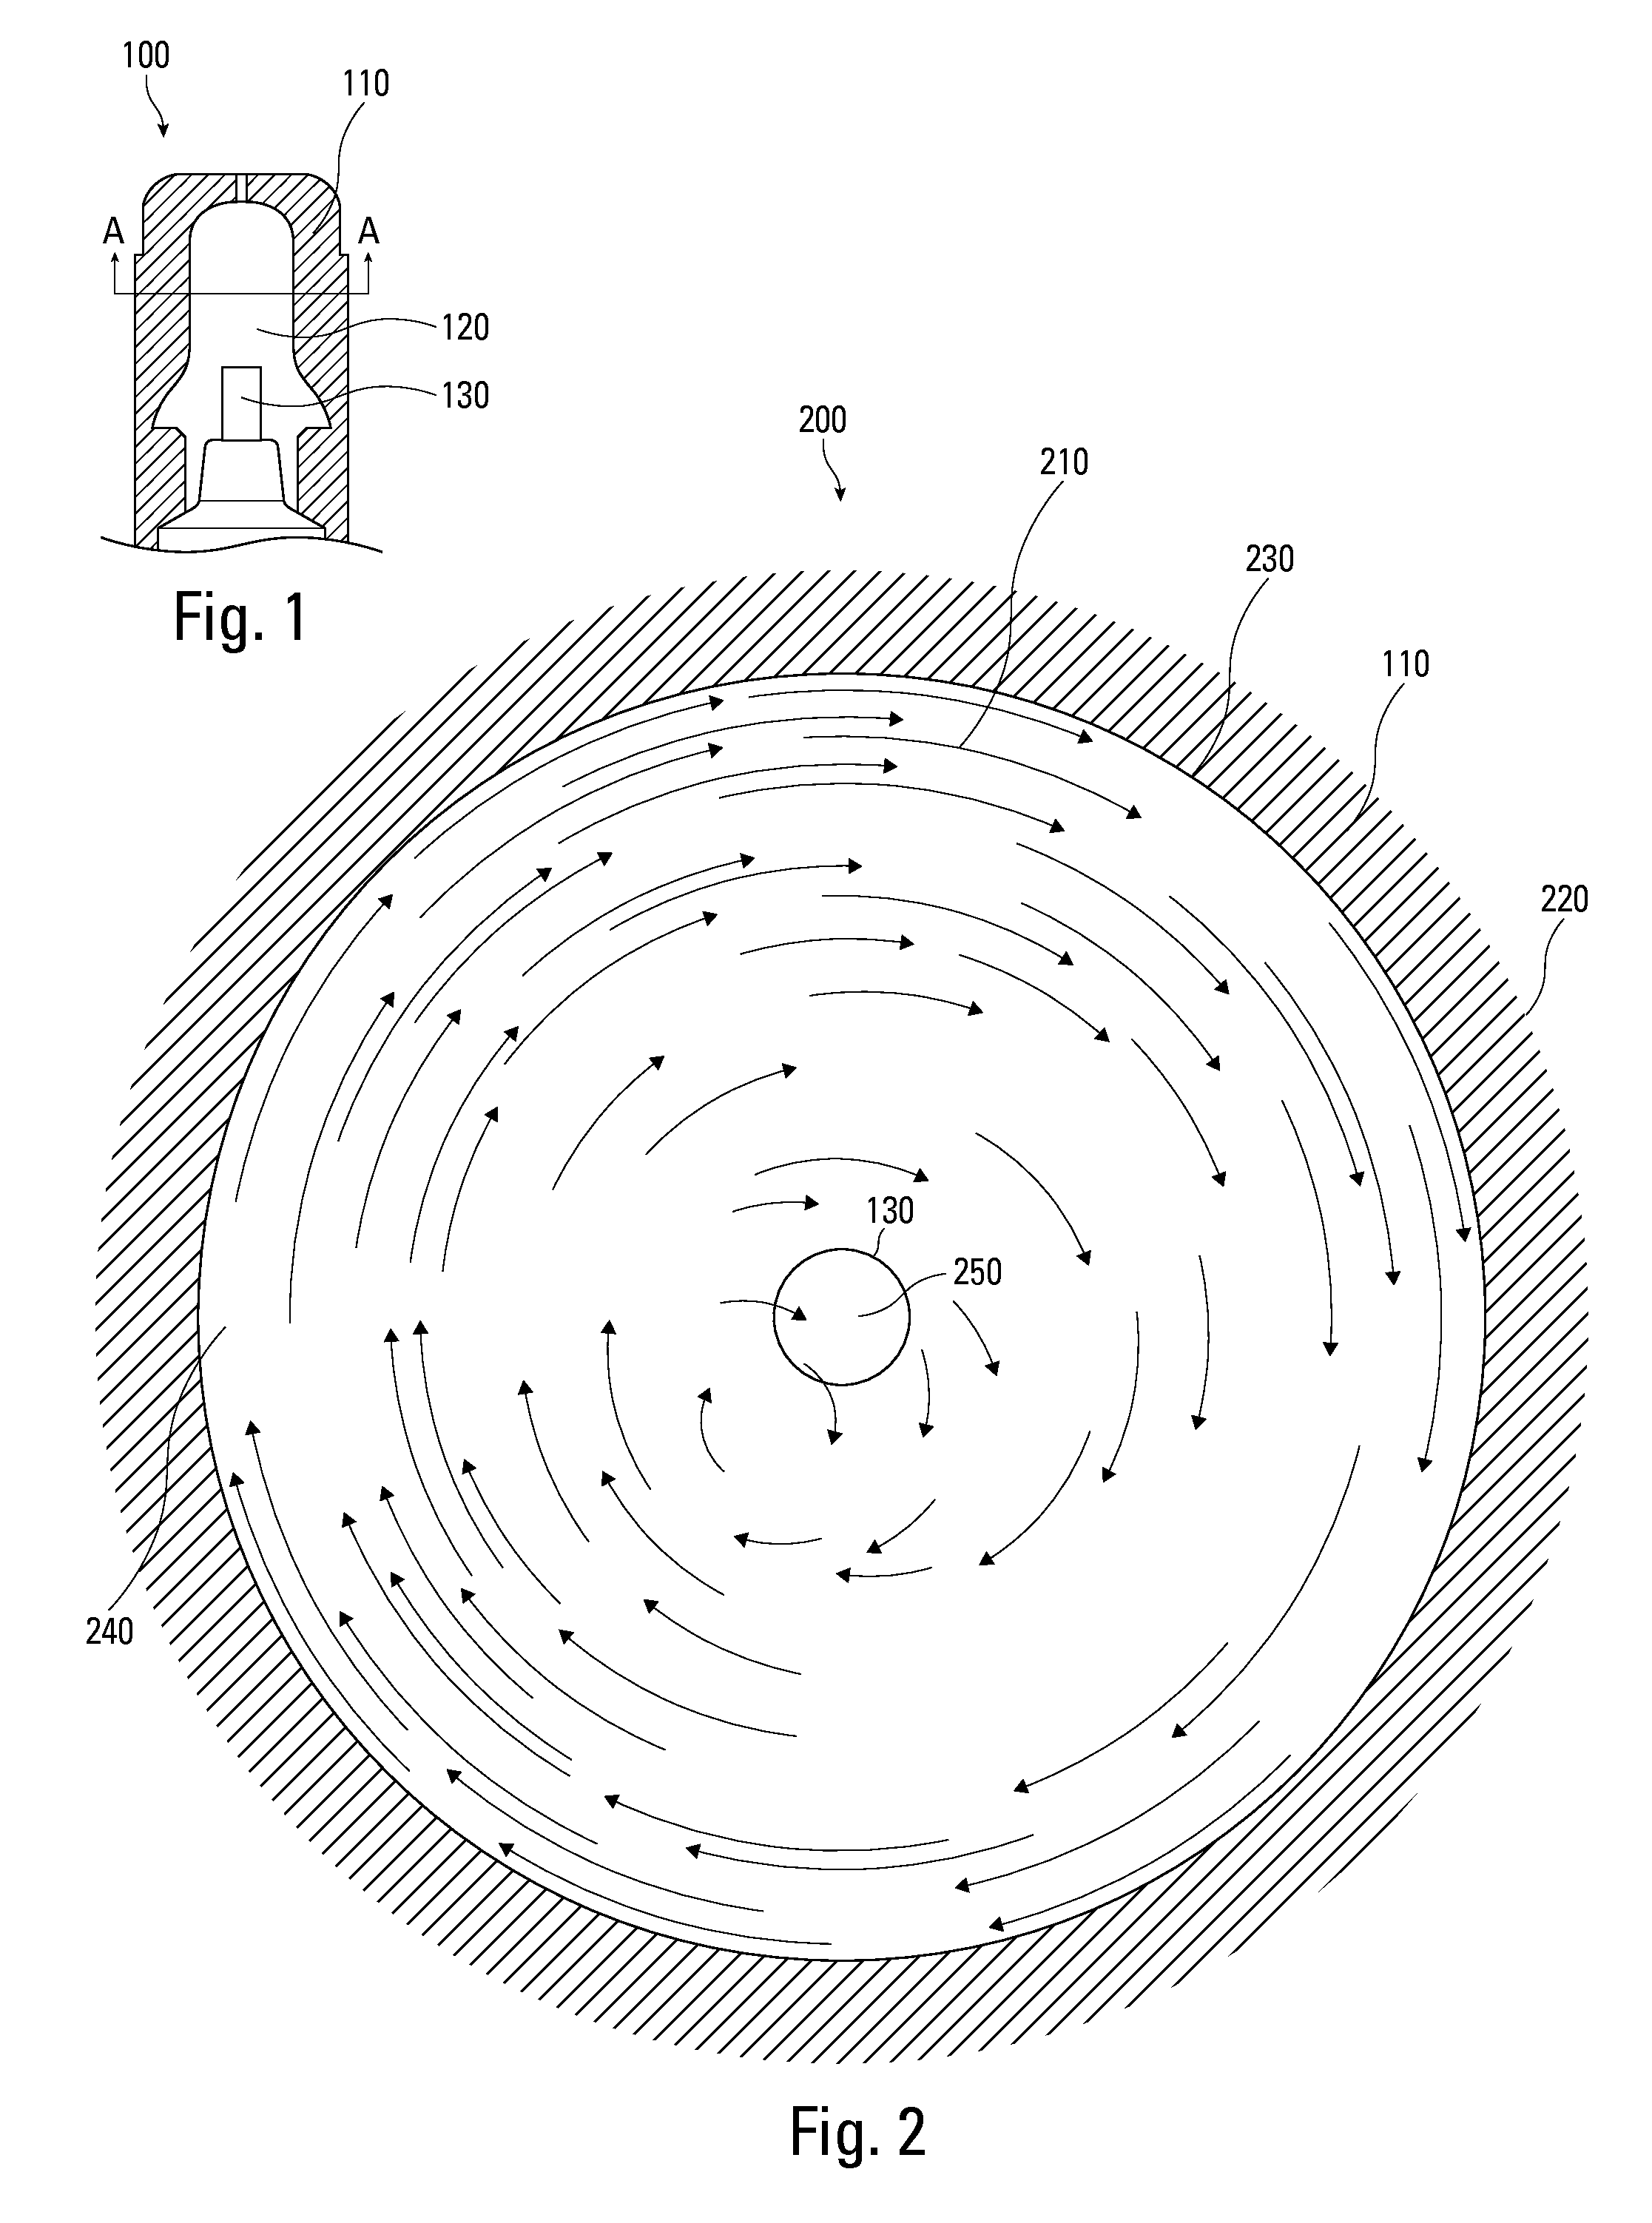 Method and apparatus for achieving high power flame jets while reducing quenching and autoignition in prechamber spark plugs for gas engines